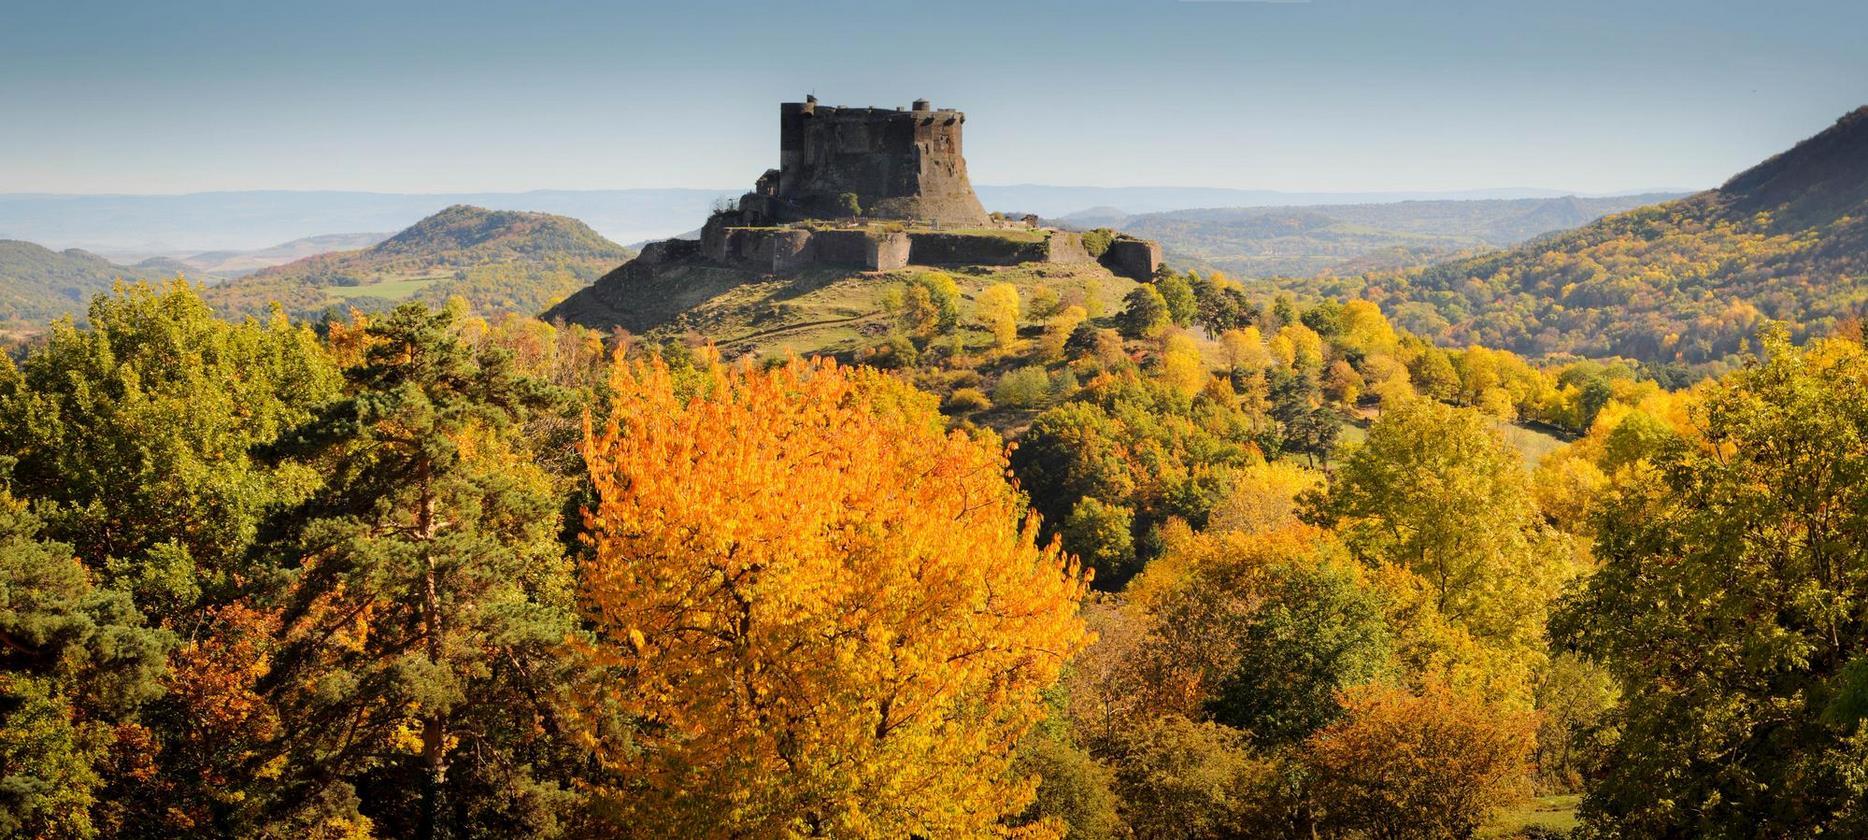 Chateau de Murol in Autumn with a view of the Auvergne volcanoes